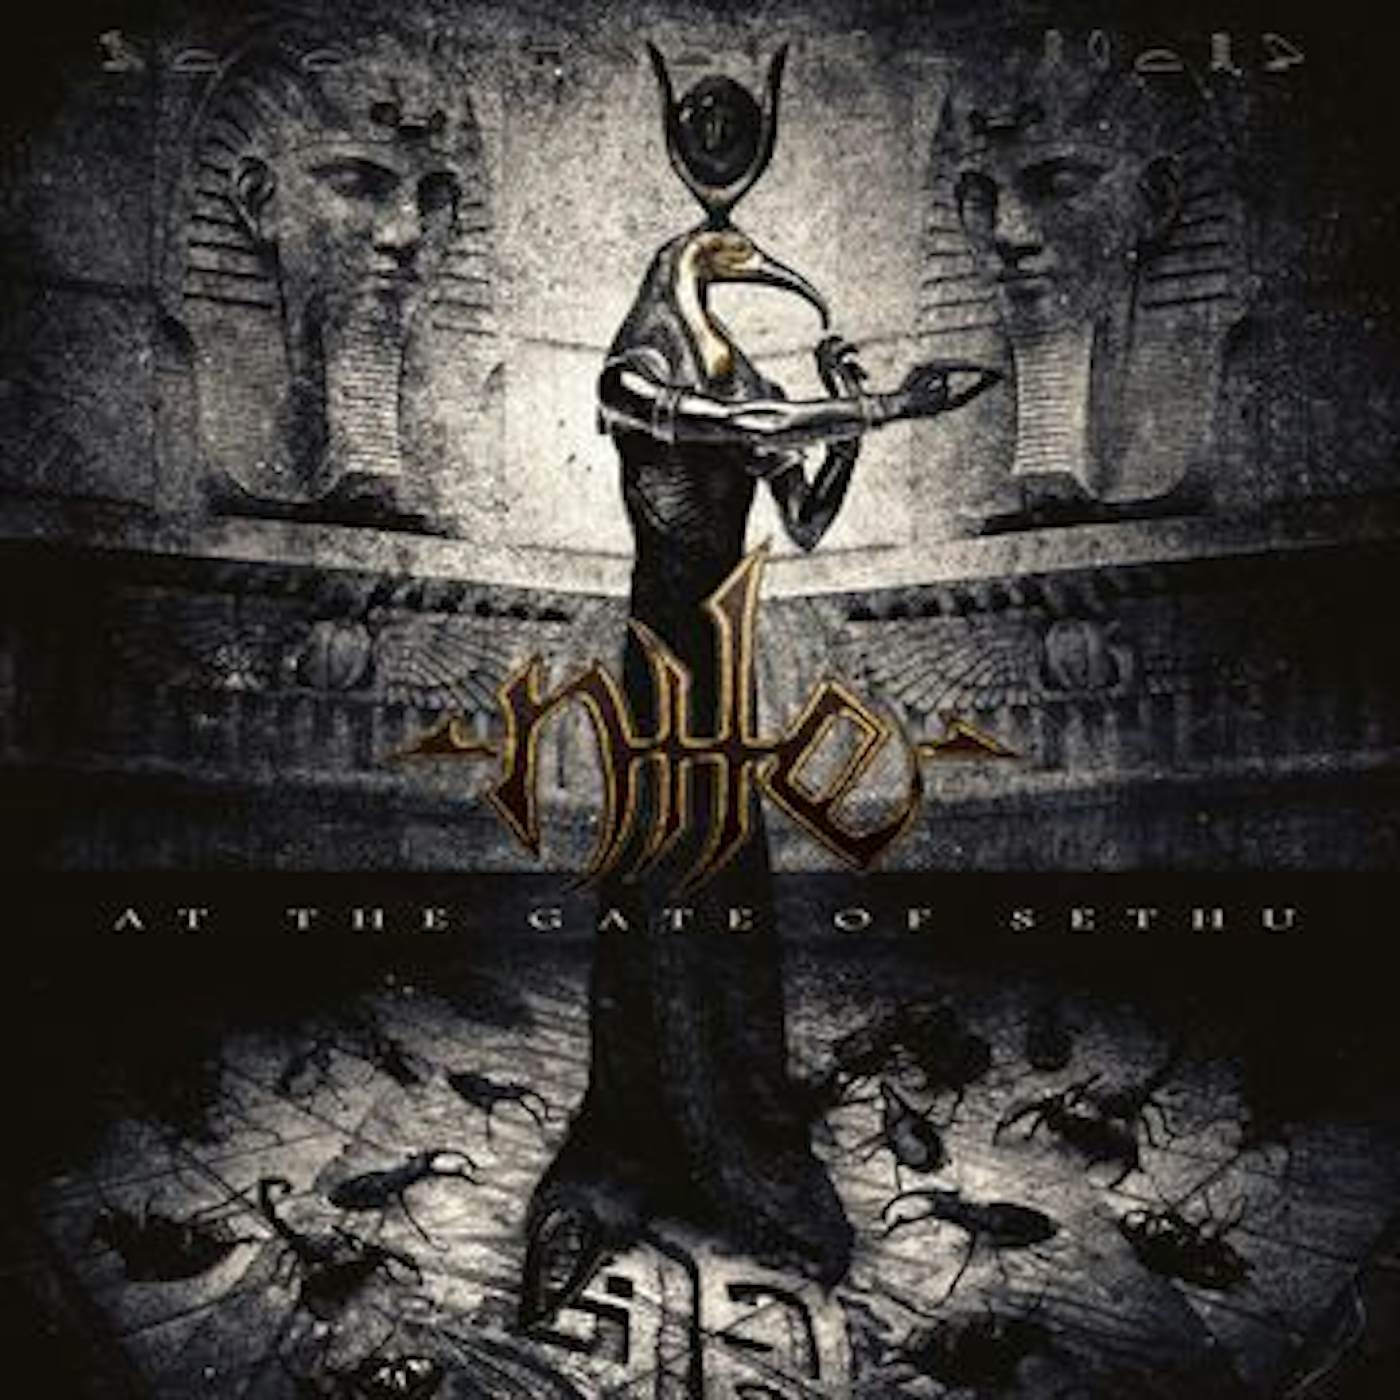 Nile At the Gate of Sethu Vinyl Record